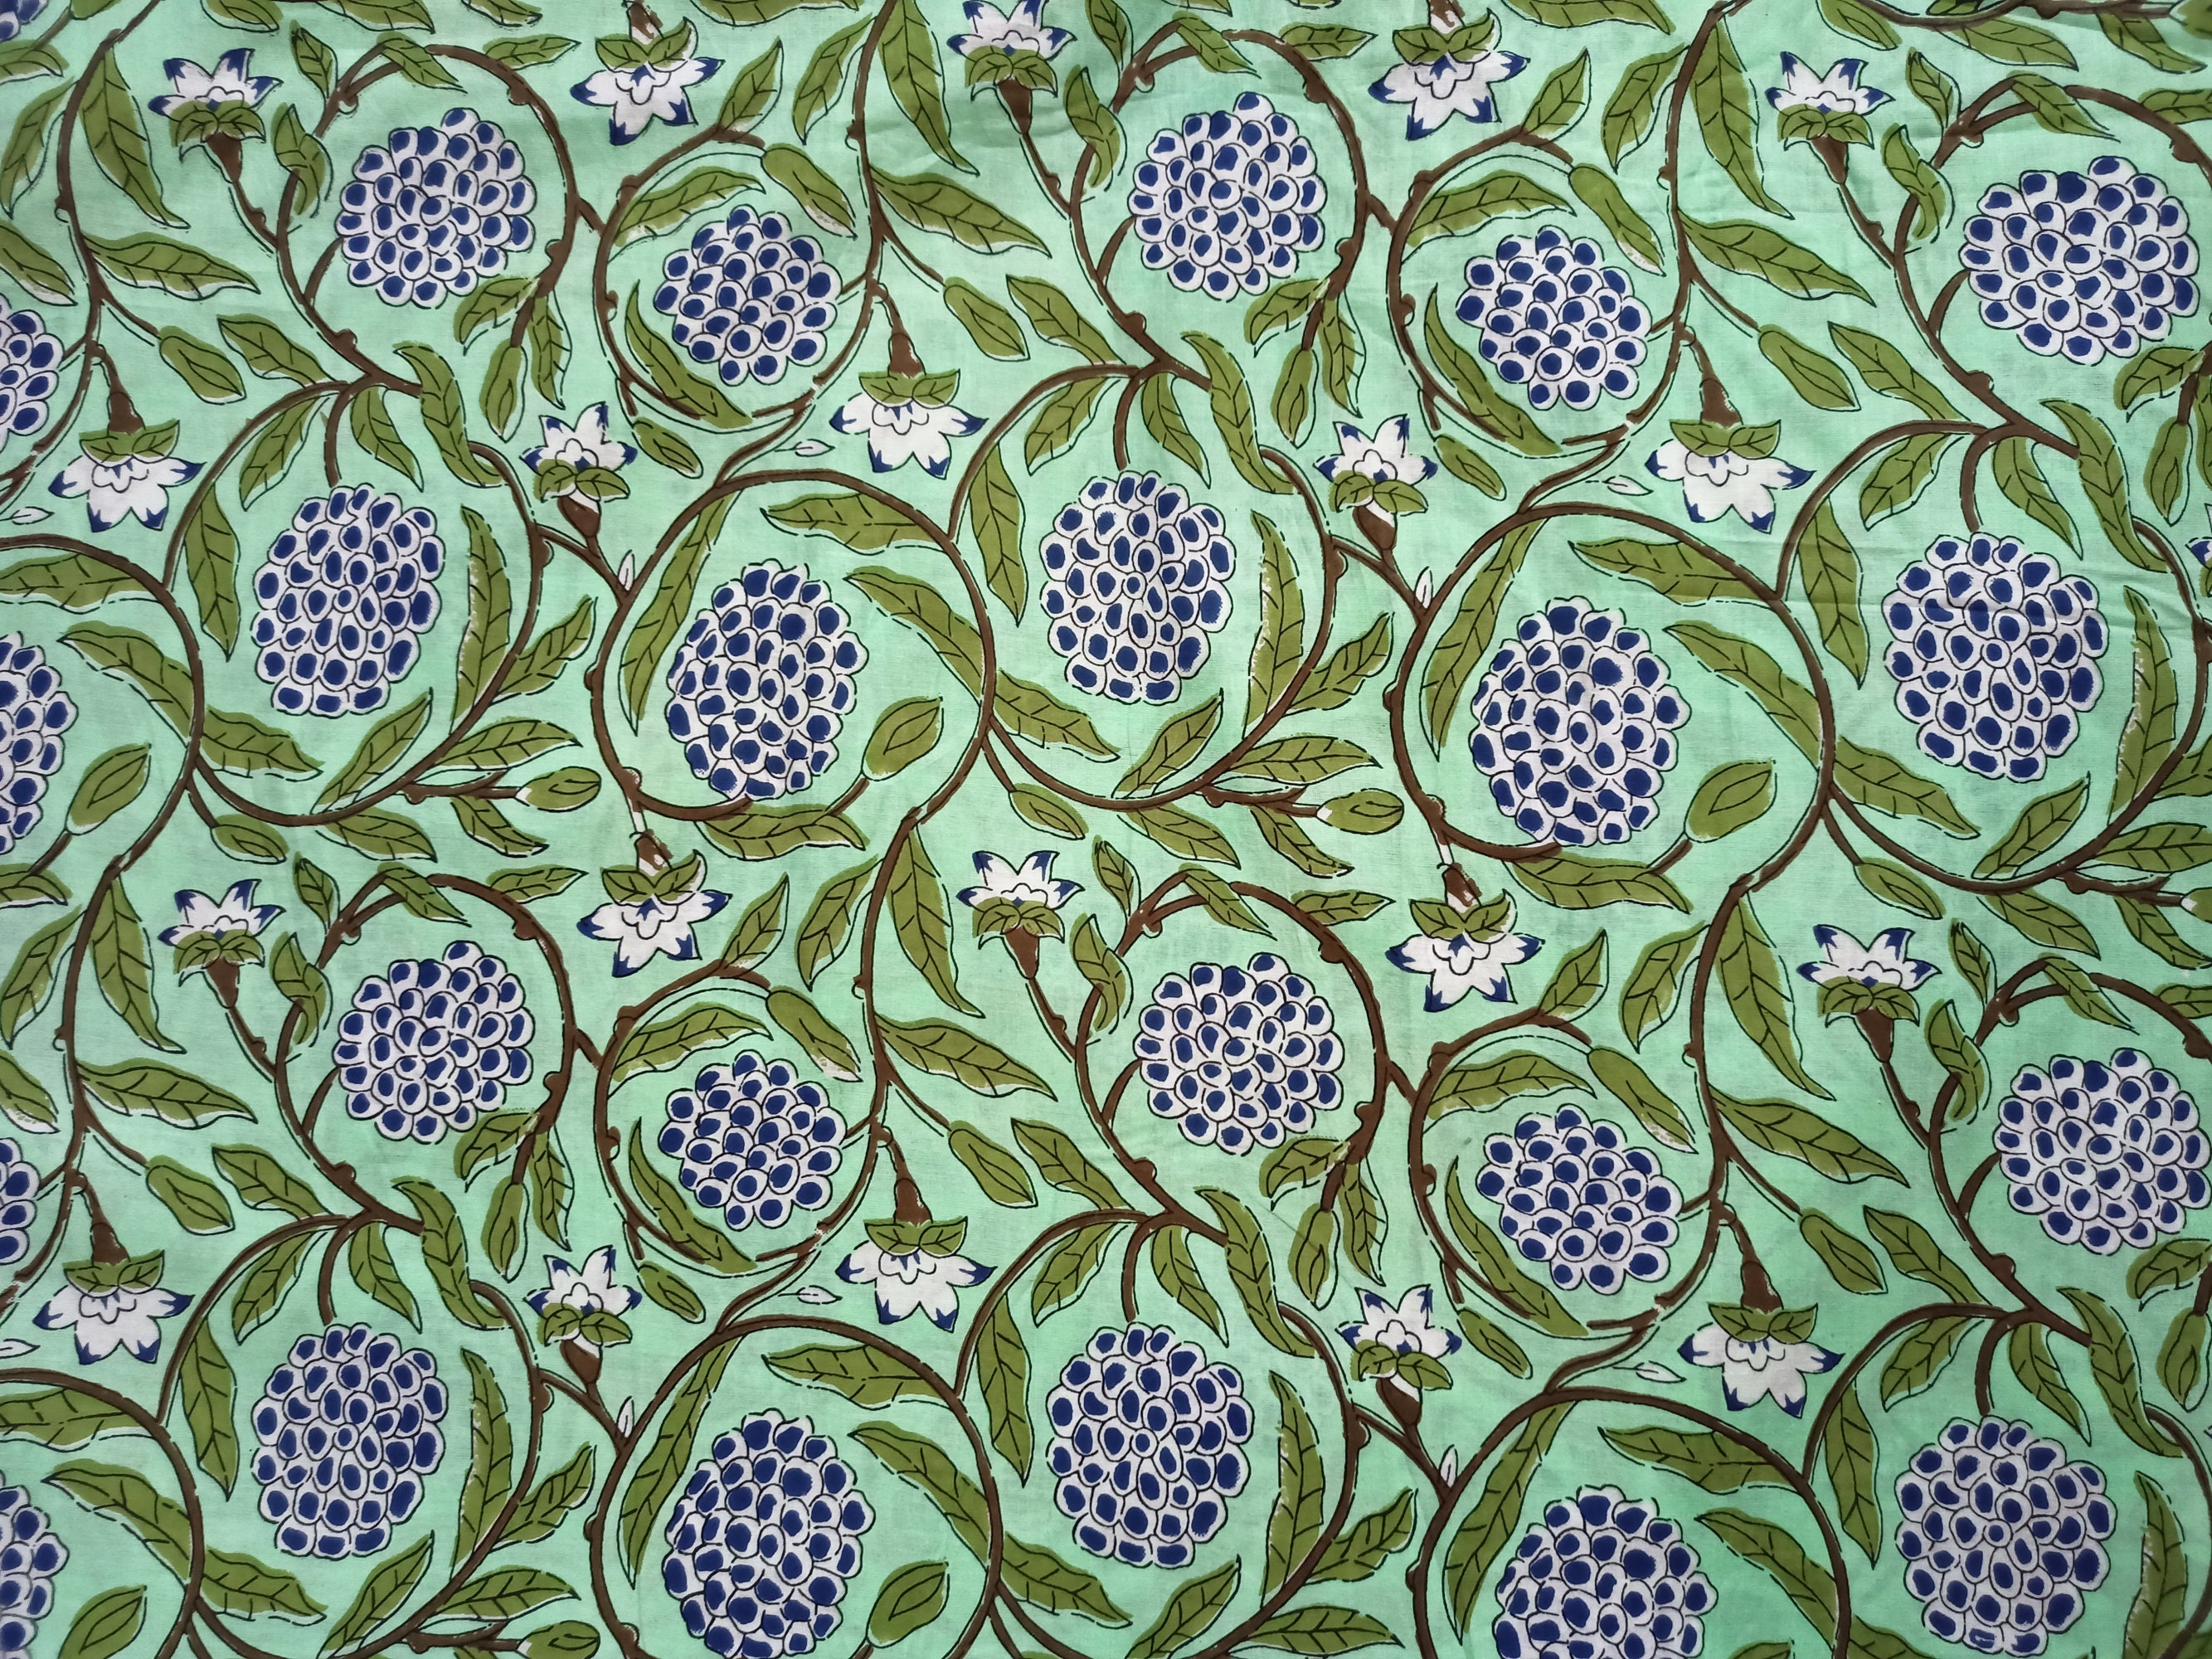 Sanganeri Print Soft Cotton Fabric by the Yard, Indian Hand Block Print  Fabric, Floral Print Fabric, Dressmaking Fabric, Sewing Fabric 